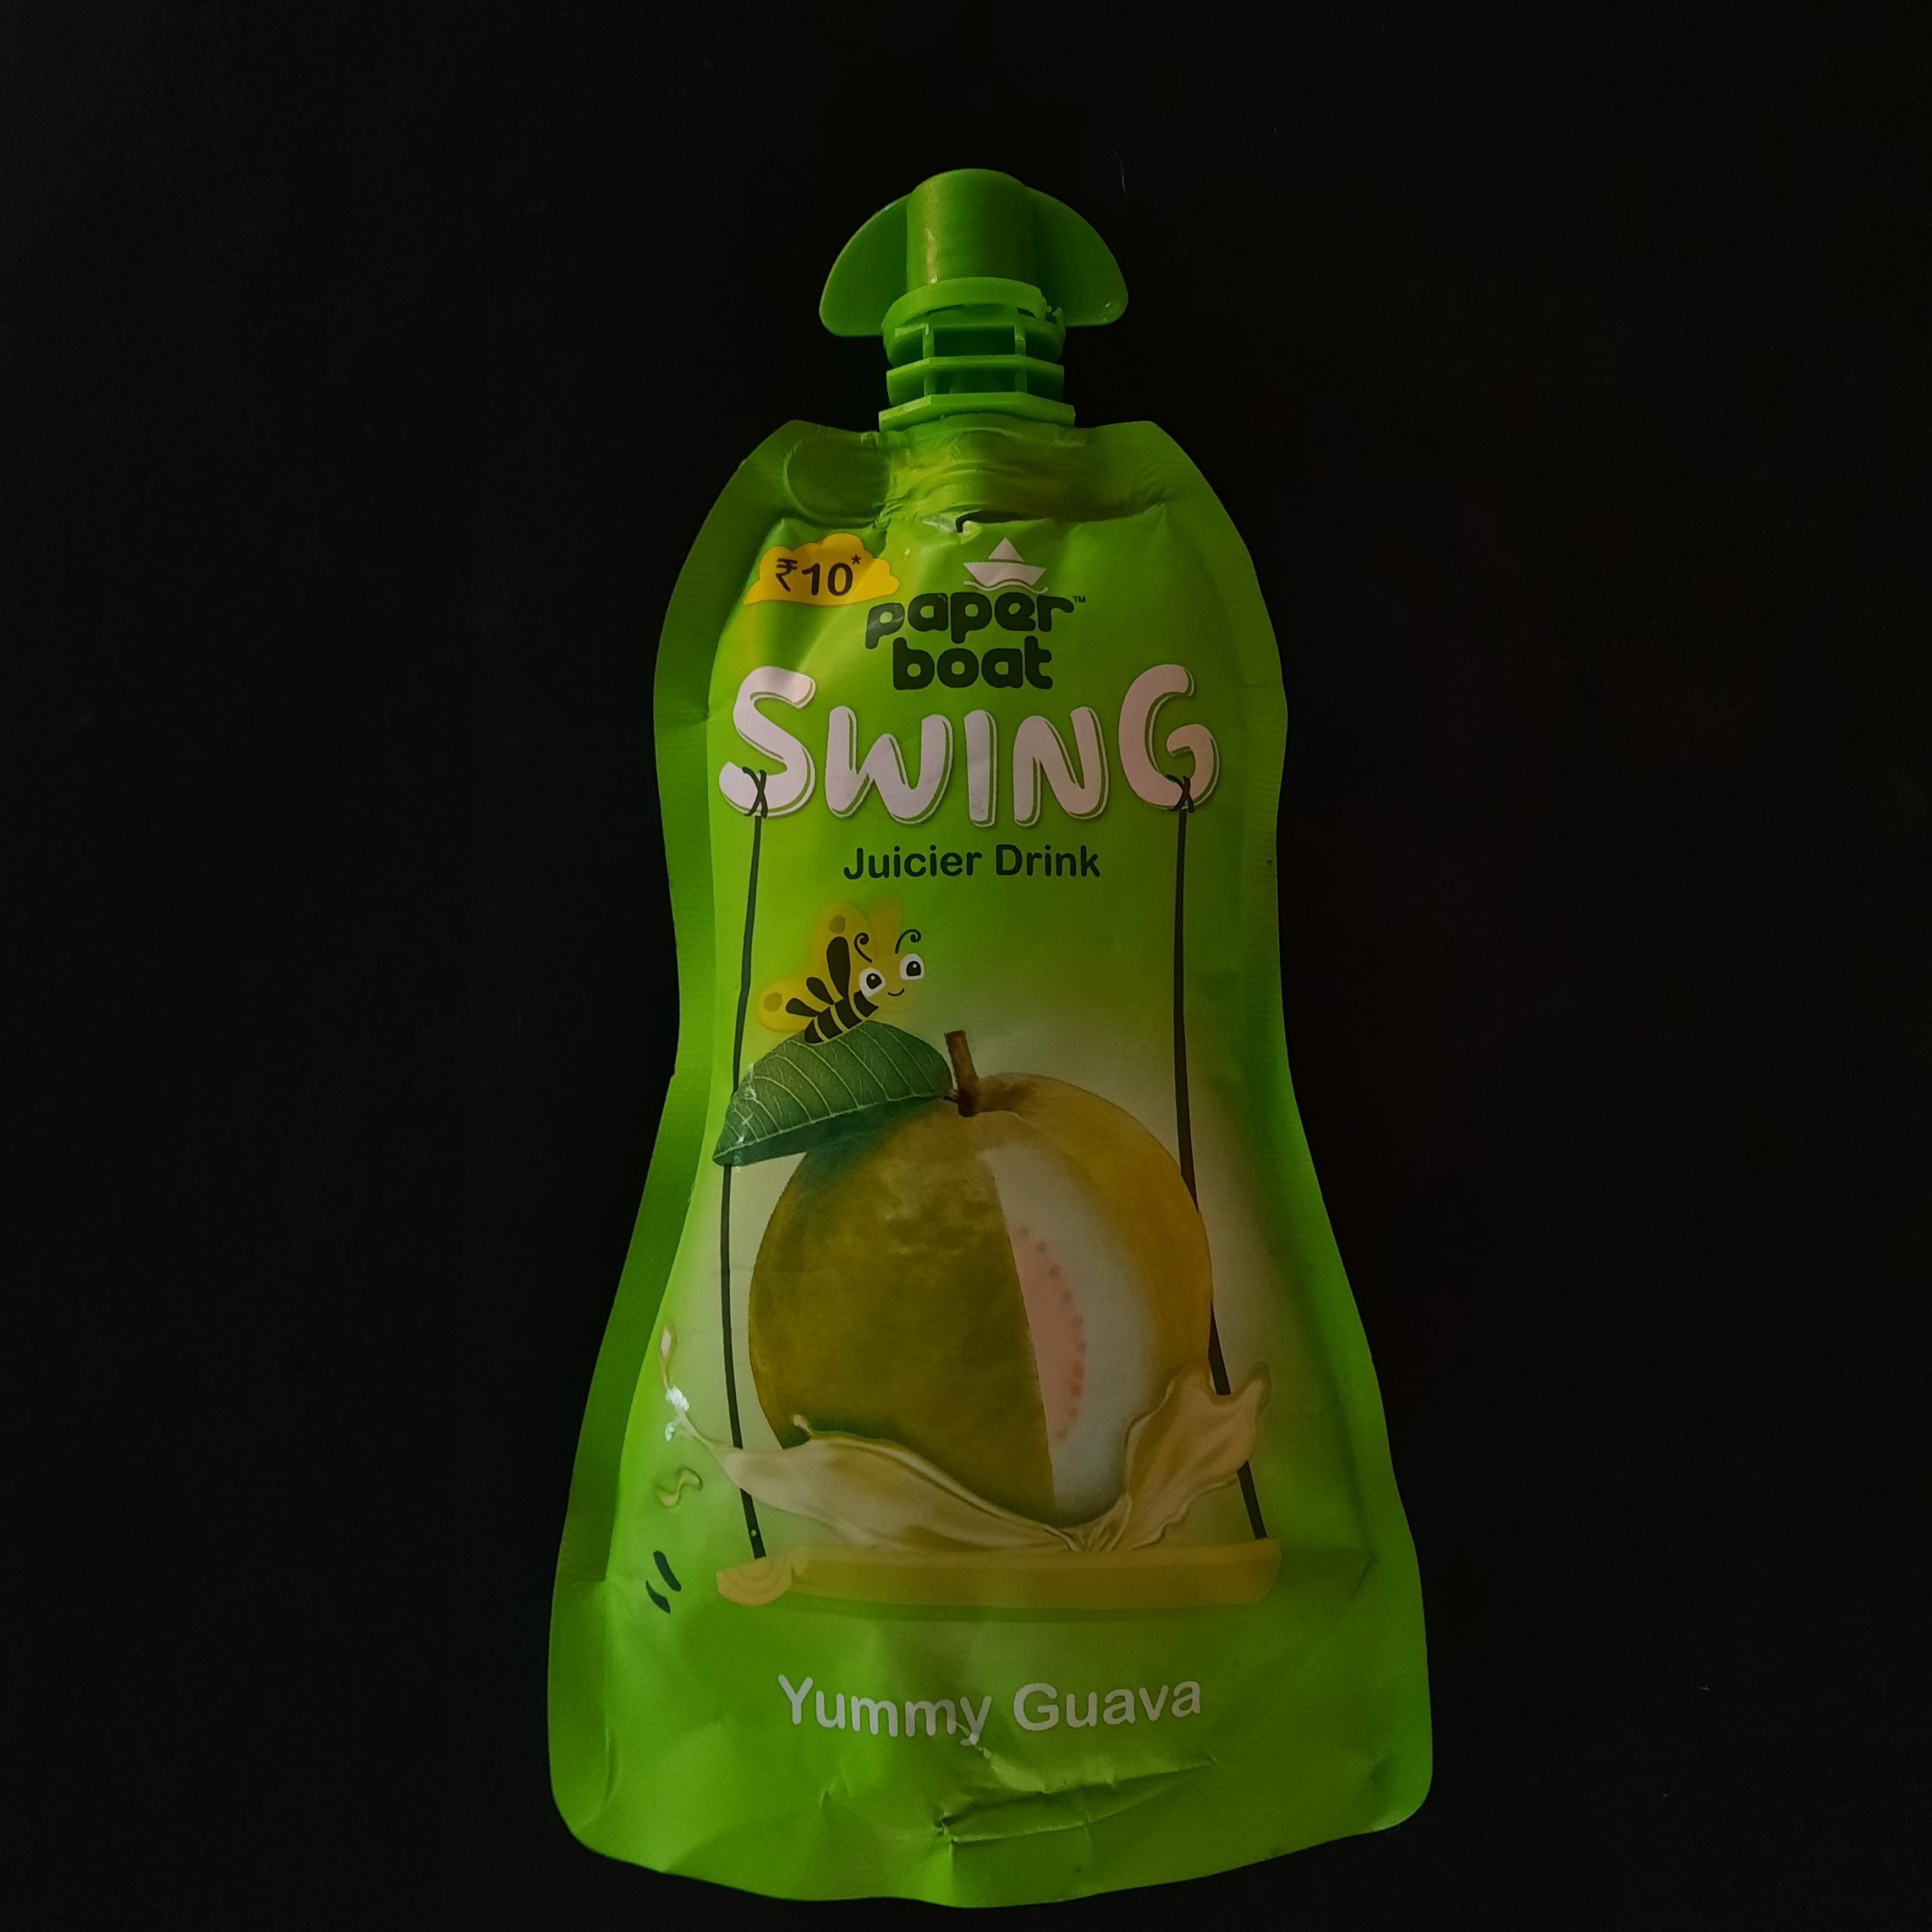 A packaged guava juice